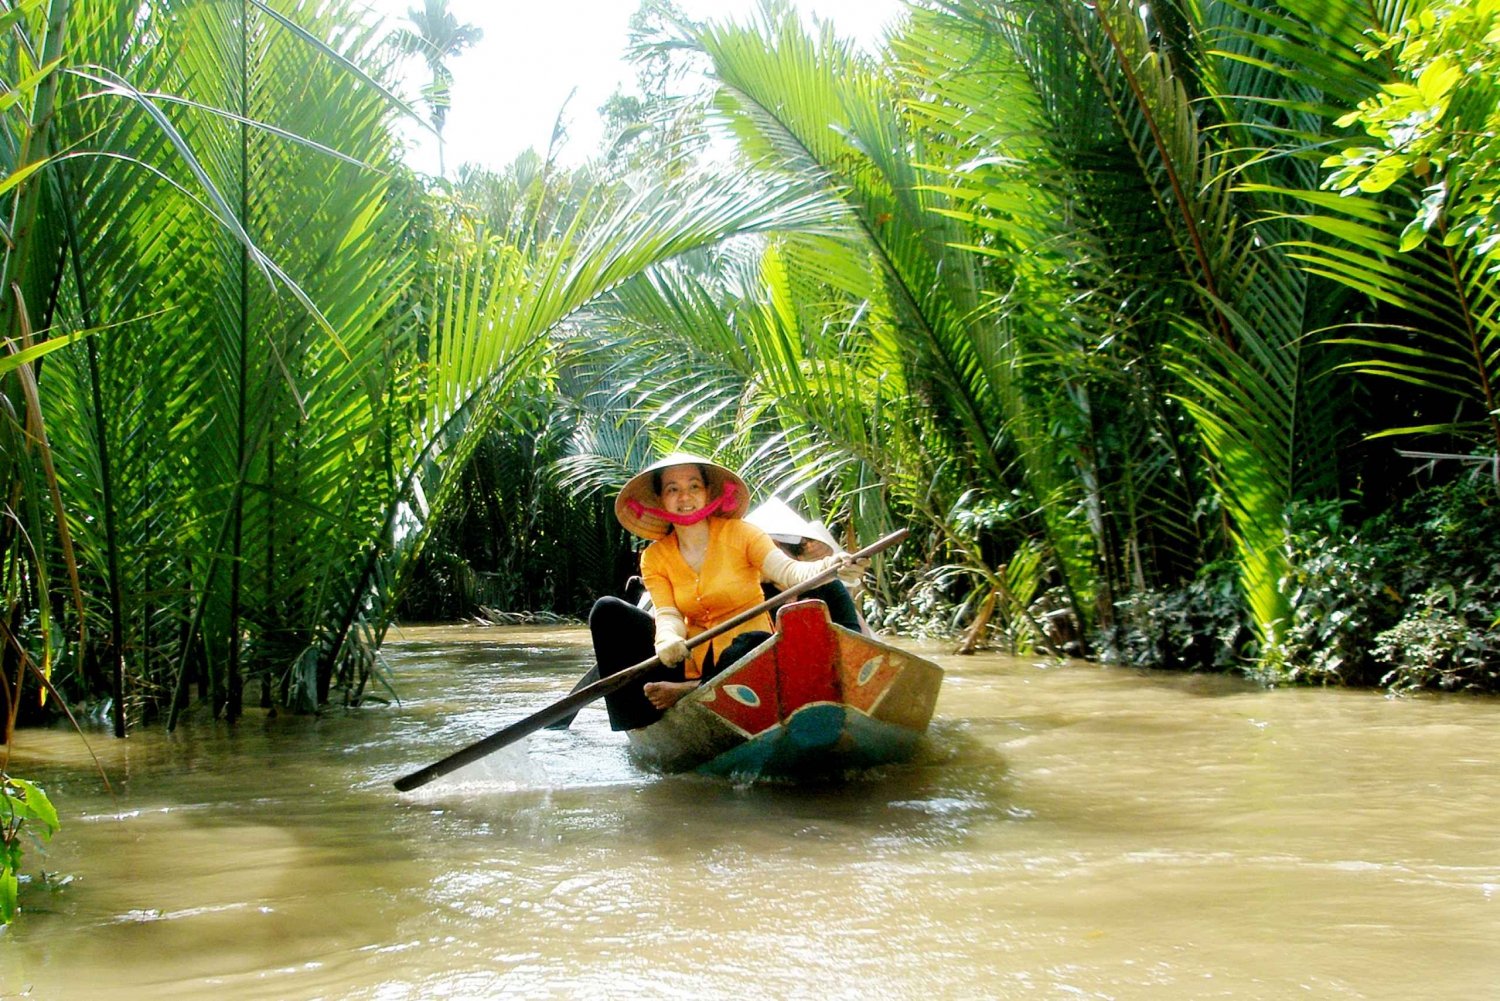 Ho Chi Minh City: Mekong Delta Day Tour to My Tho & Ben Tre